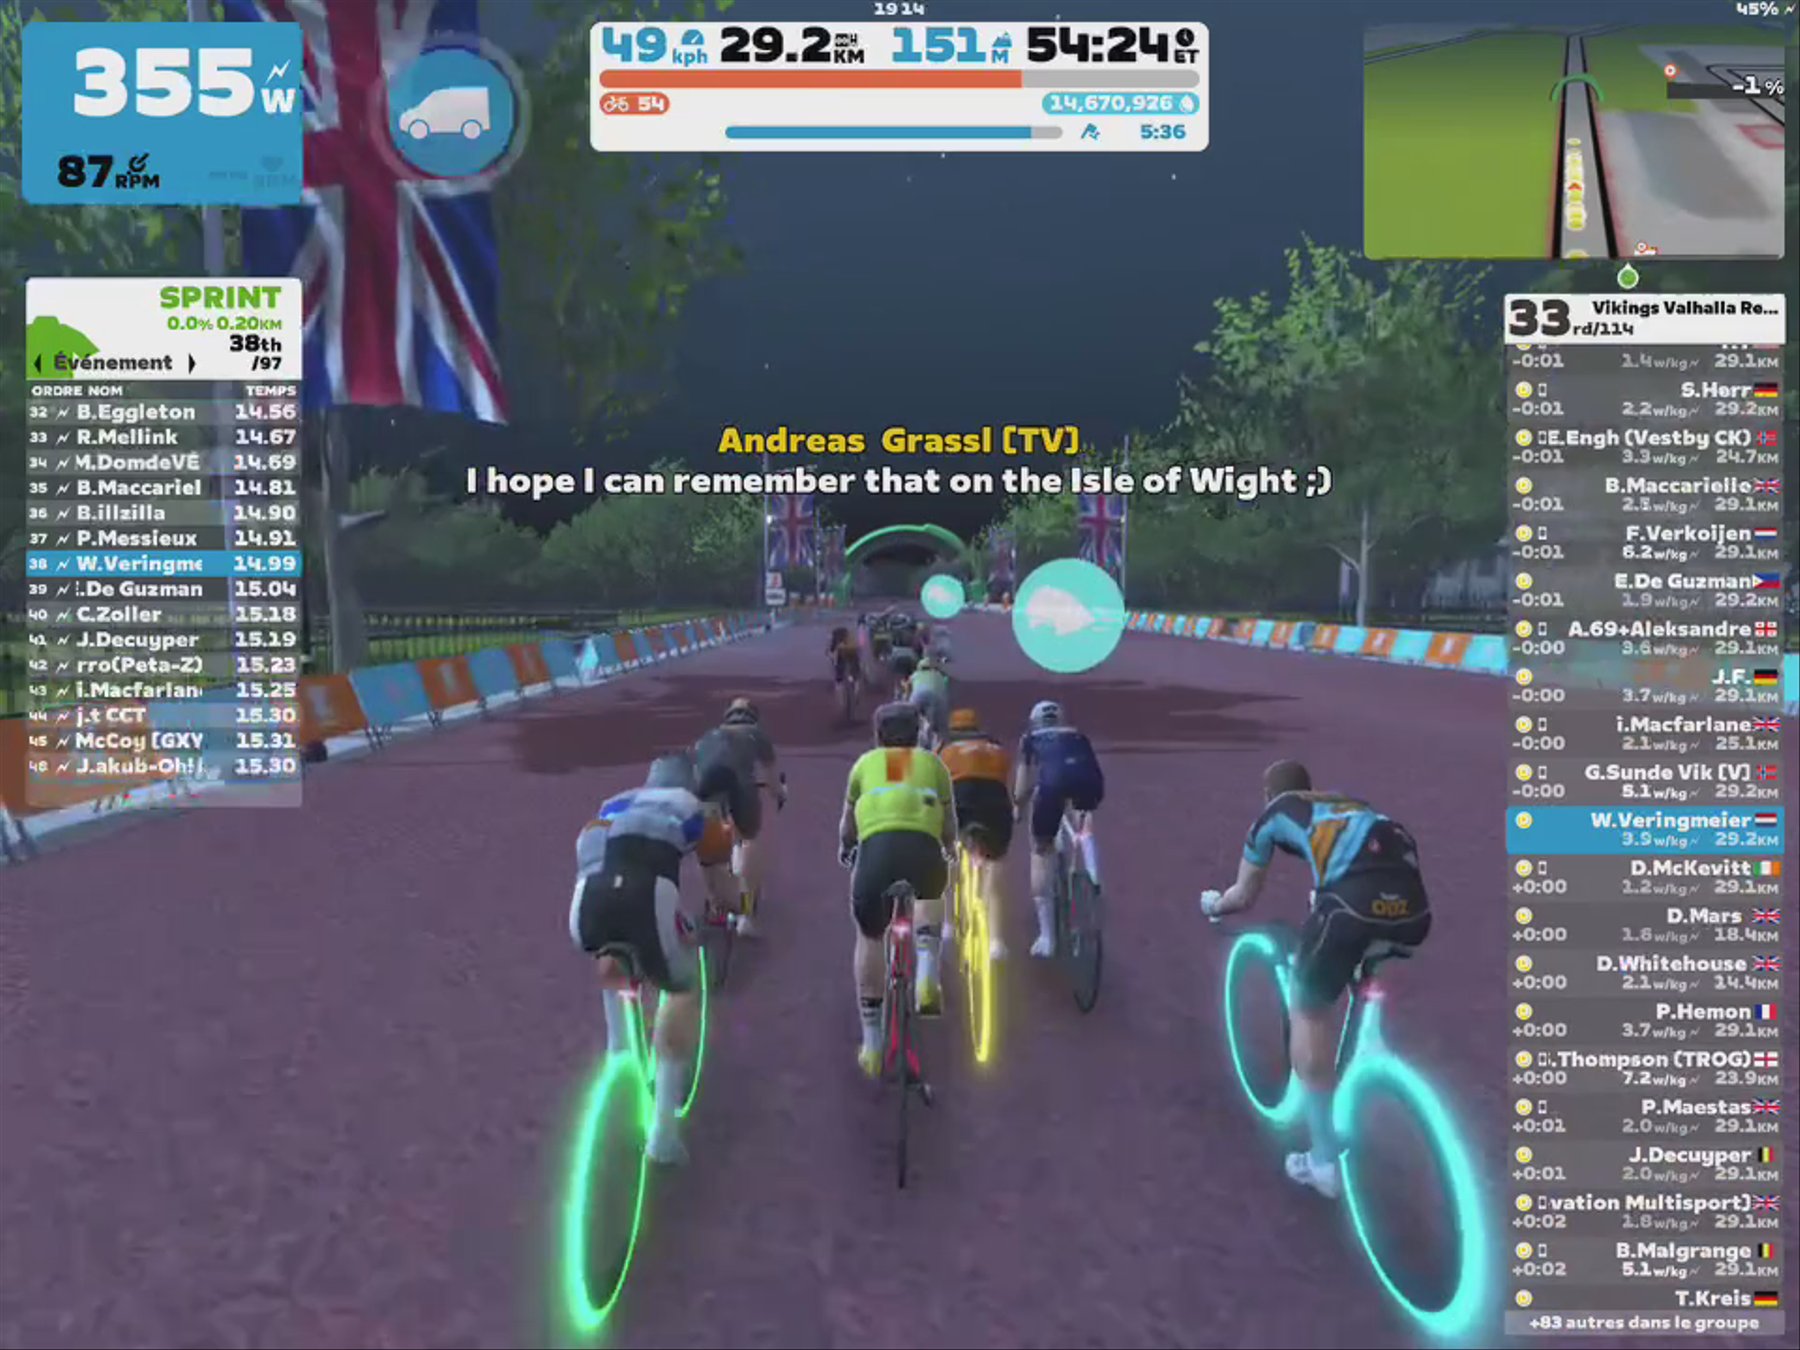 Zwift - Group Ride: Vikings Valhalla Recovery Ride  (D) on Greater London Flat in London